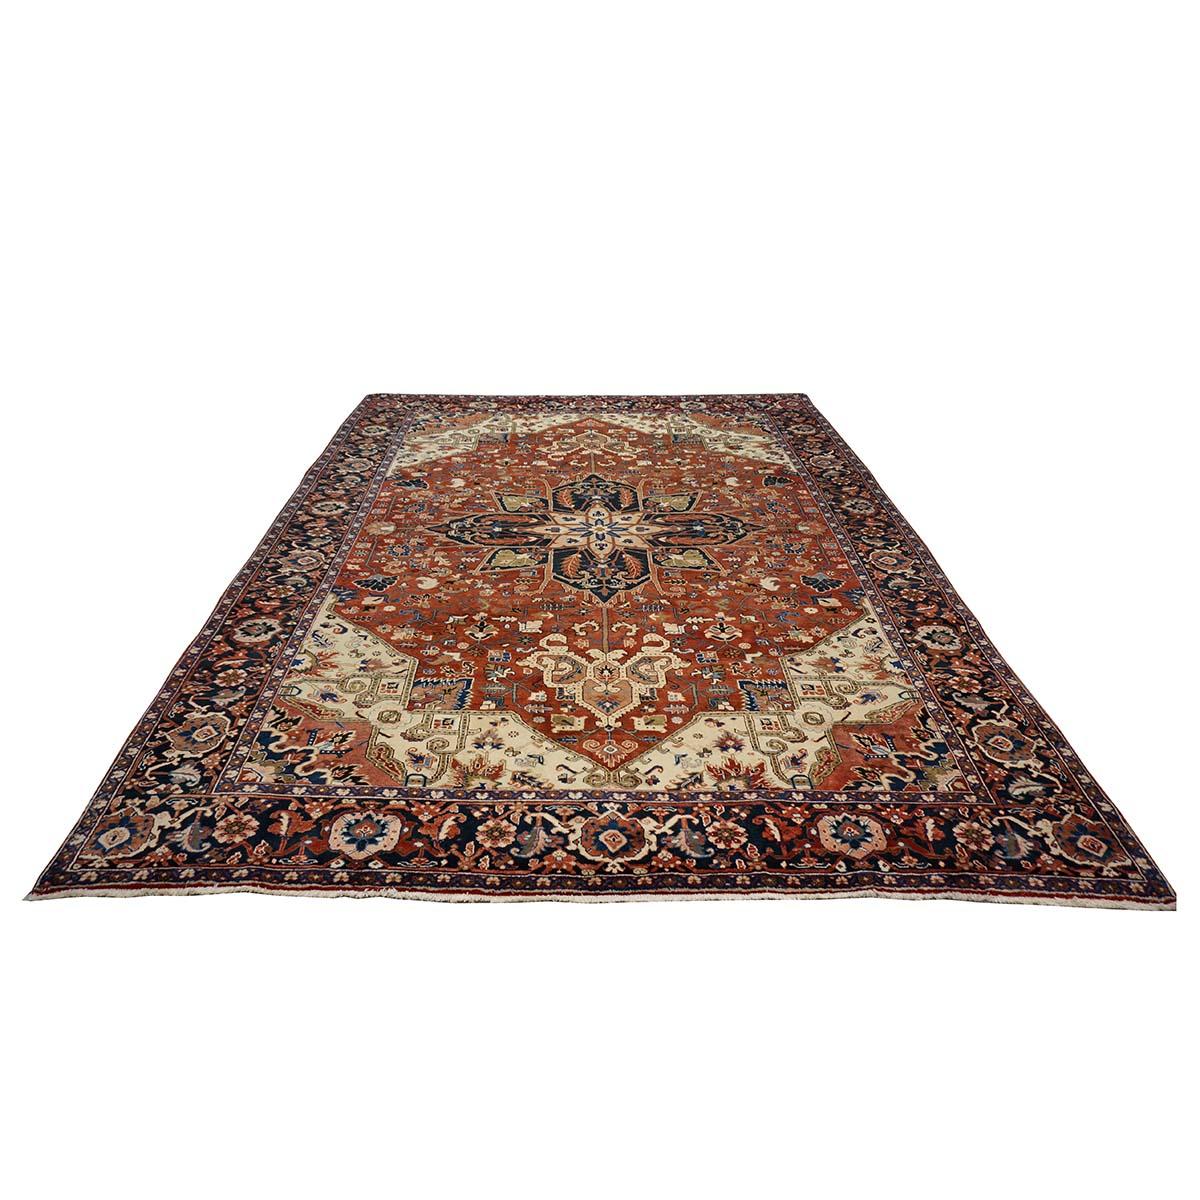 Ashly Fine Rugs presents a 1950s Vintage Persian Heriz 10x13 Handmade Area Rug. Heriz rugs are well-known for their bold geometric patterns and vibrant colors, often featuring shades of red, blue, and ivory. These rugs typically showcase a central